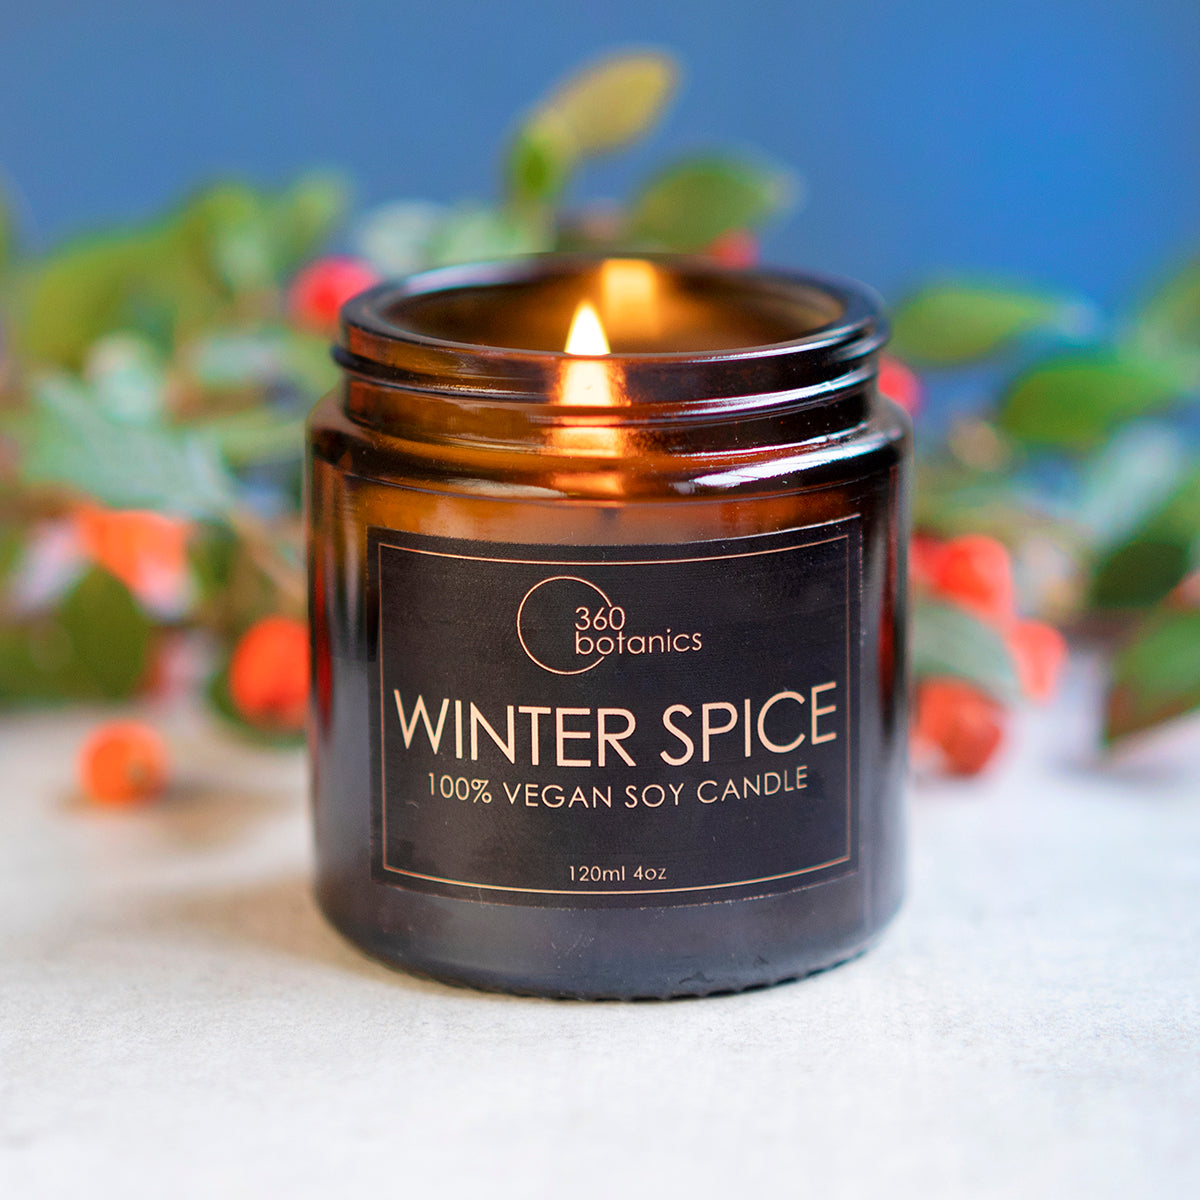 winter spice candle lit in Christmas environment with holly and berries